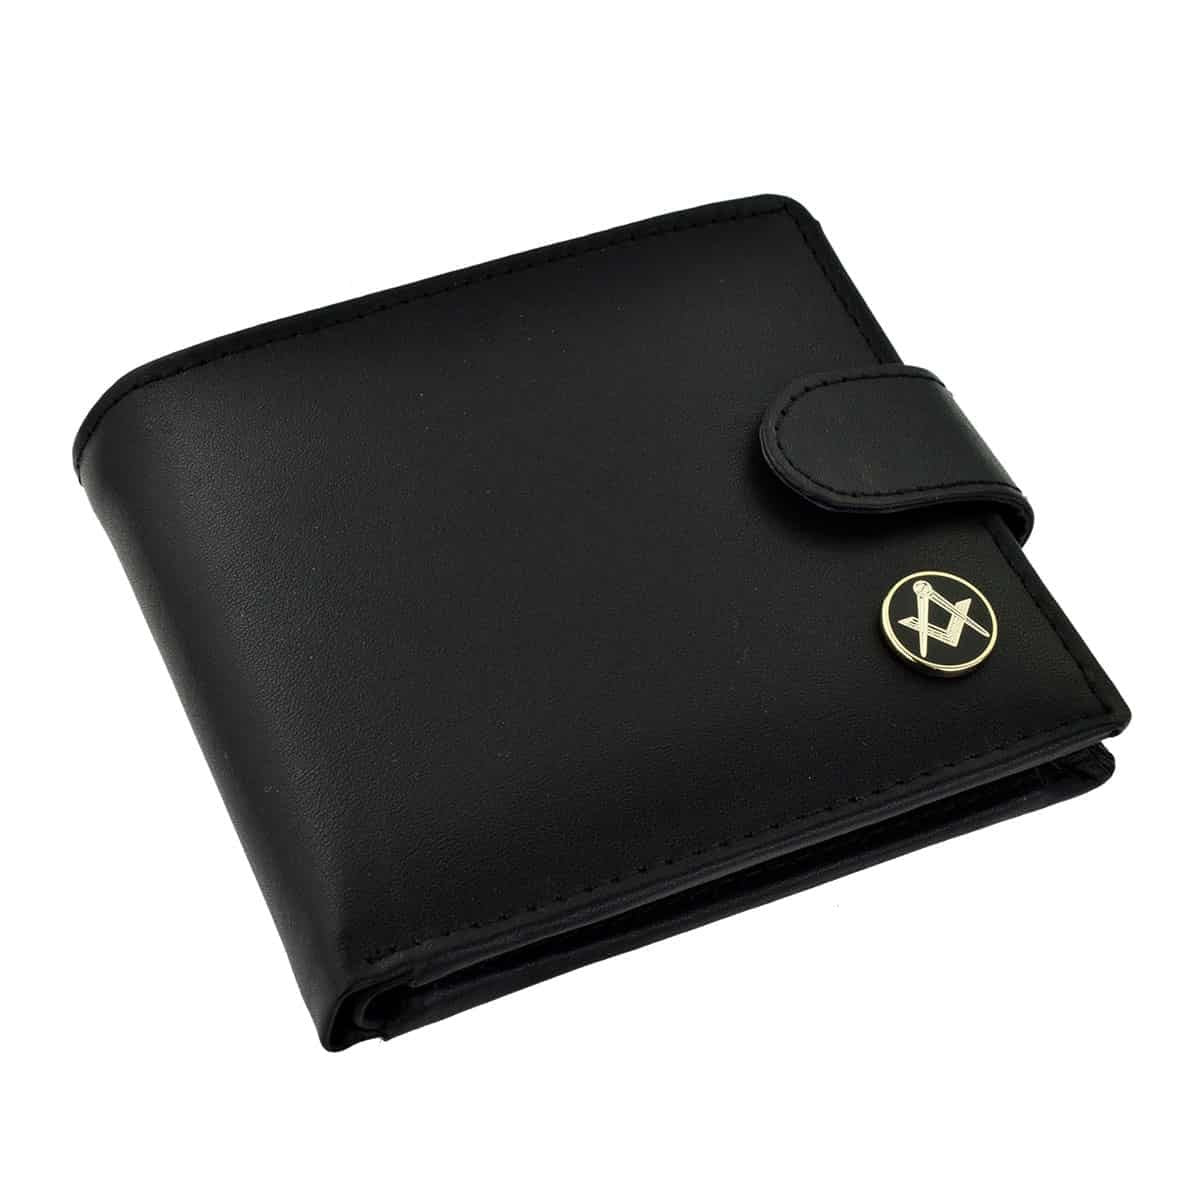 Masonic Wallet - Leather Wallet With Coin Pocket - Black